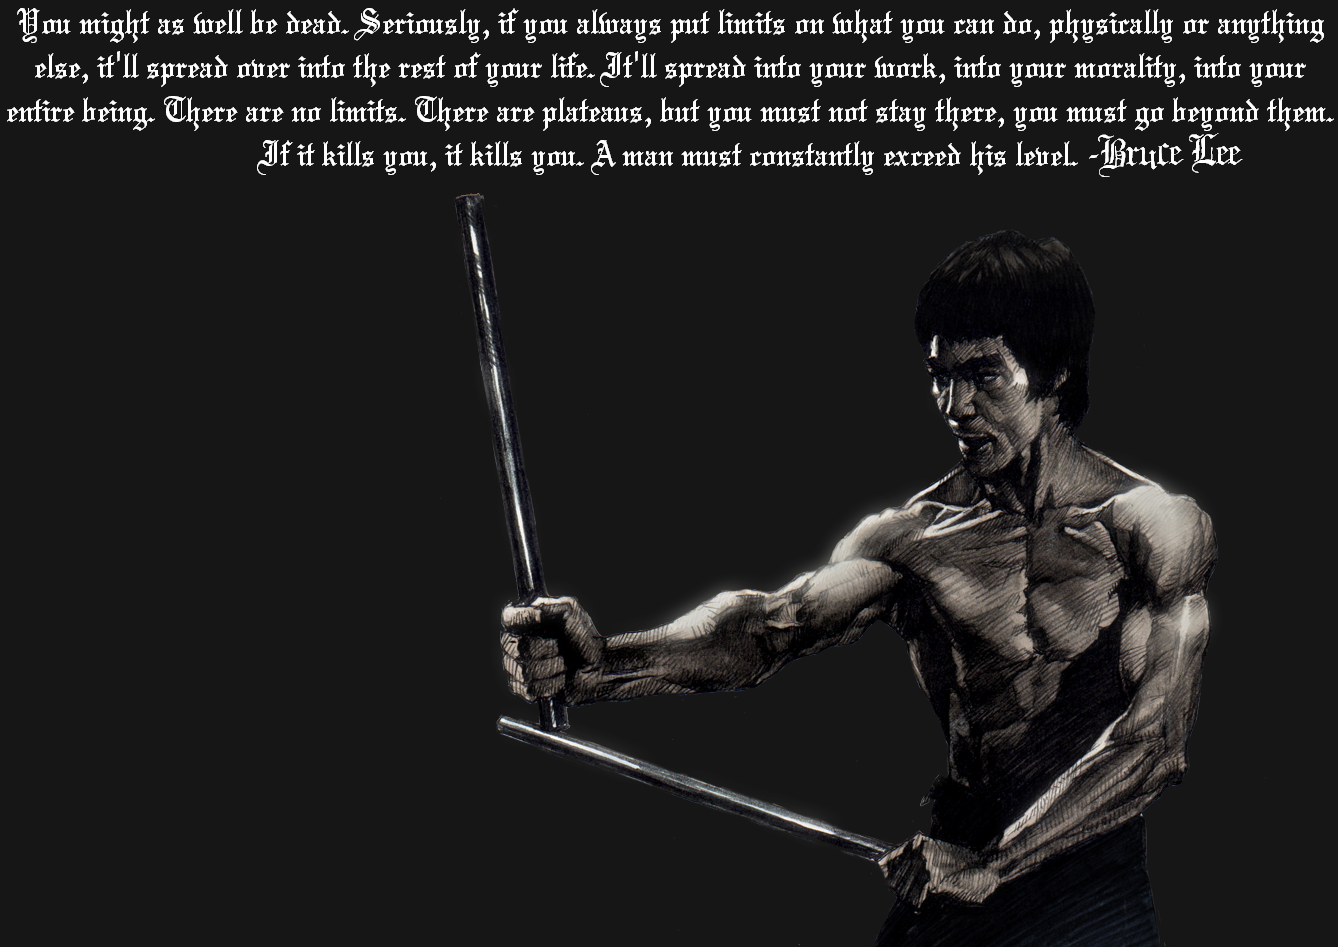 Bruce Lee HD Wallpapers and Photos Download Wallpapers in HD for 1338x947